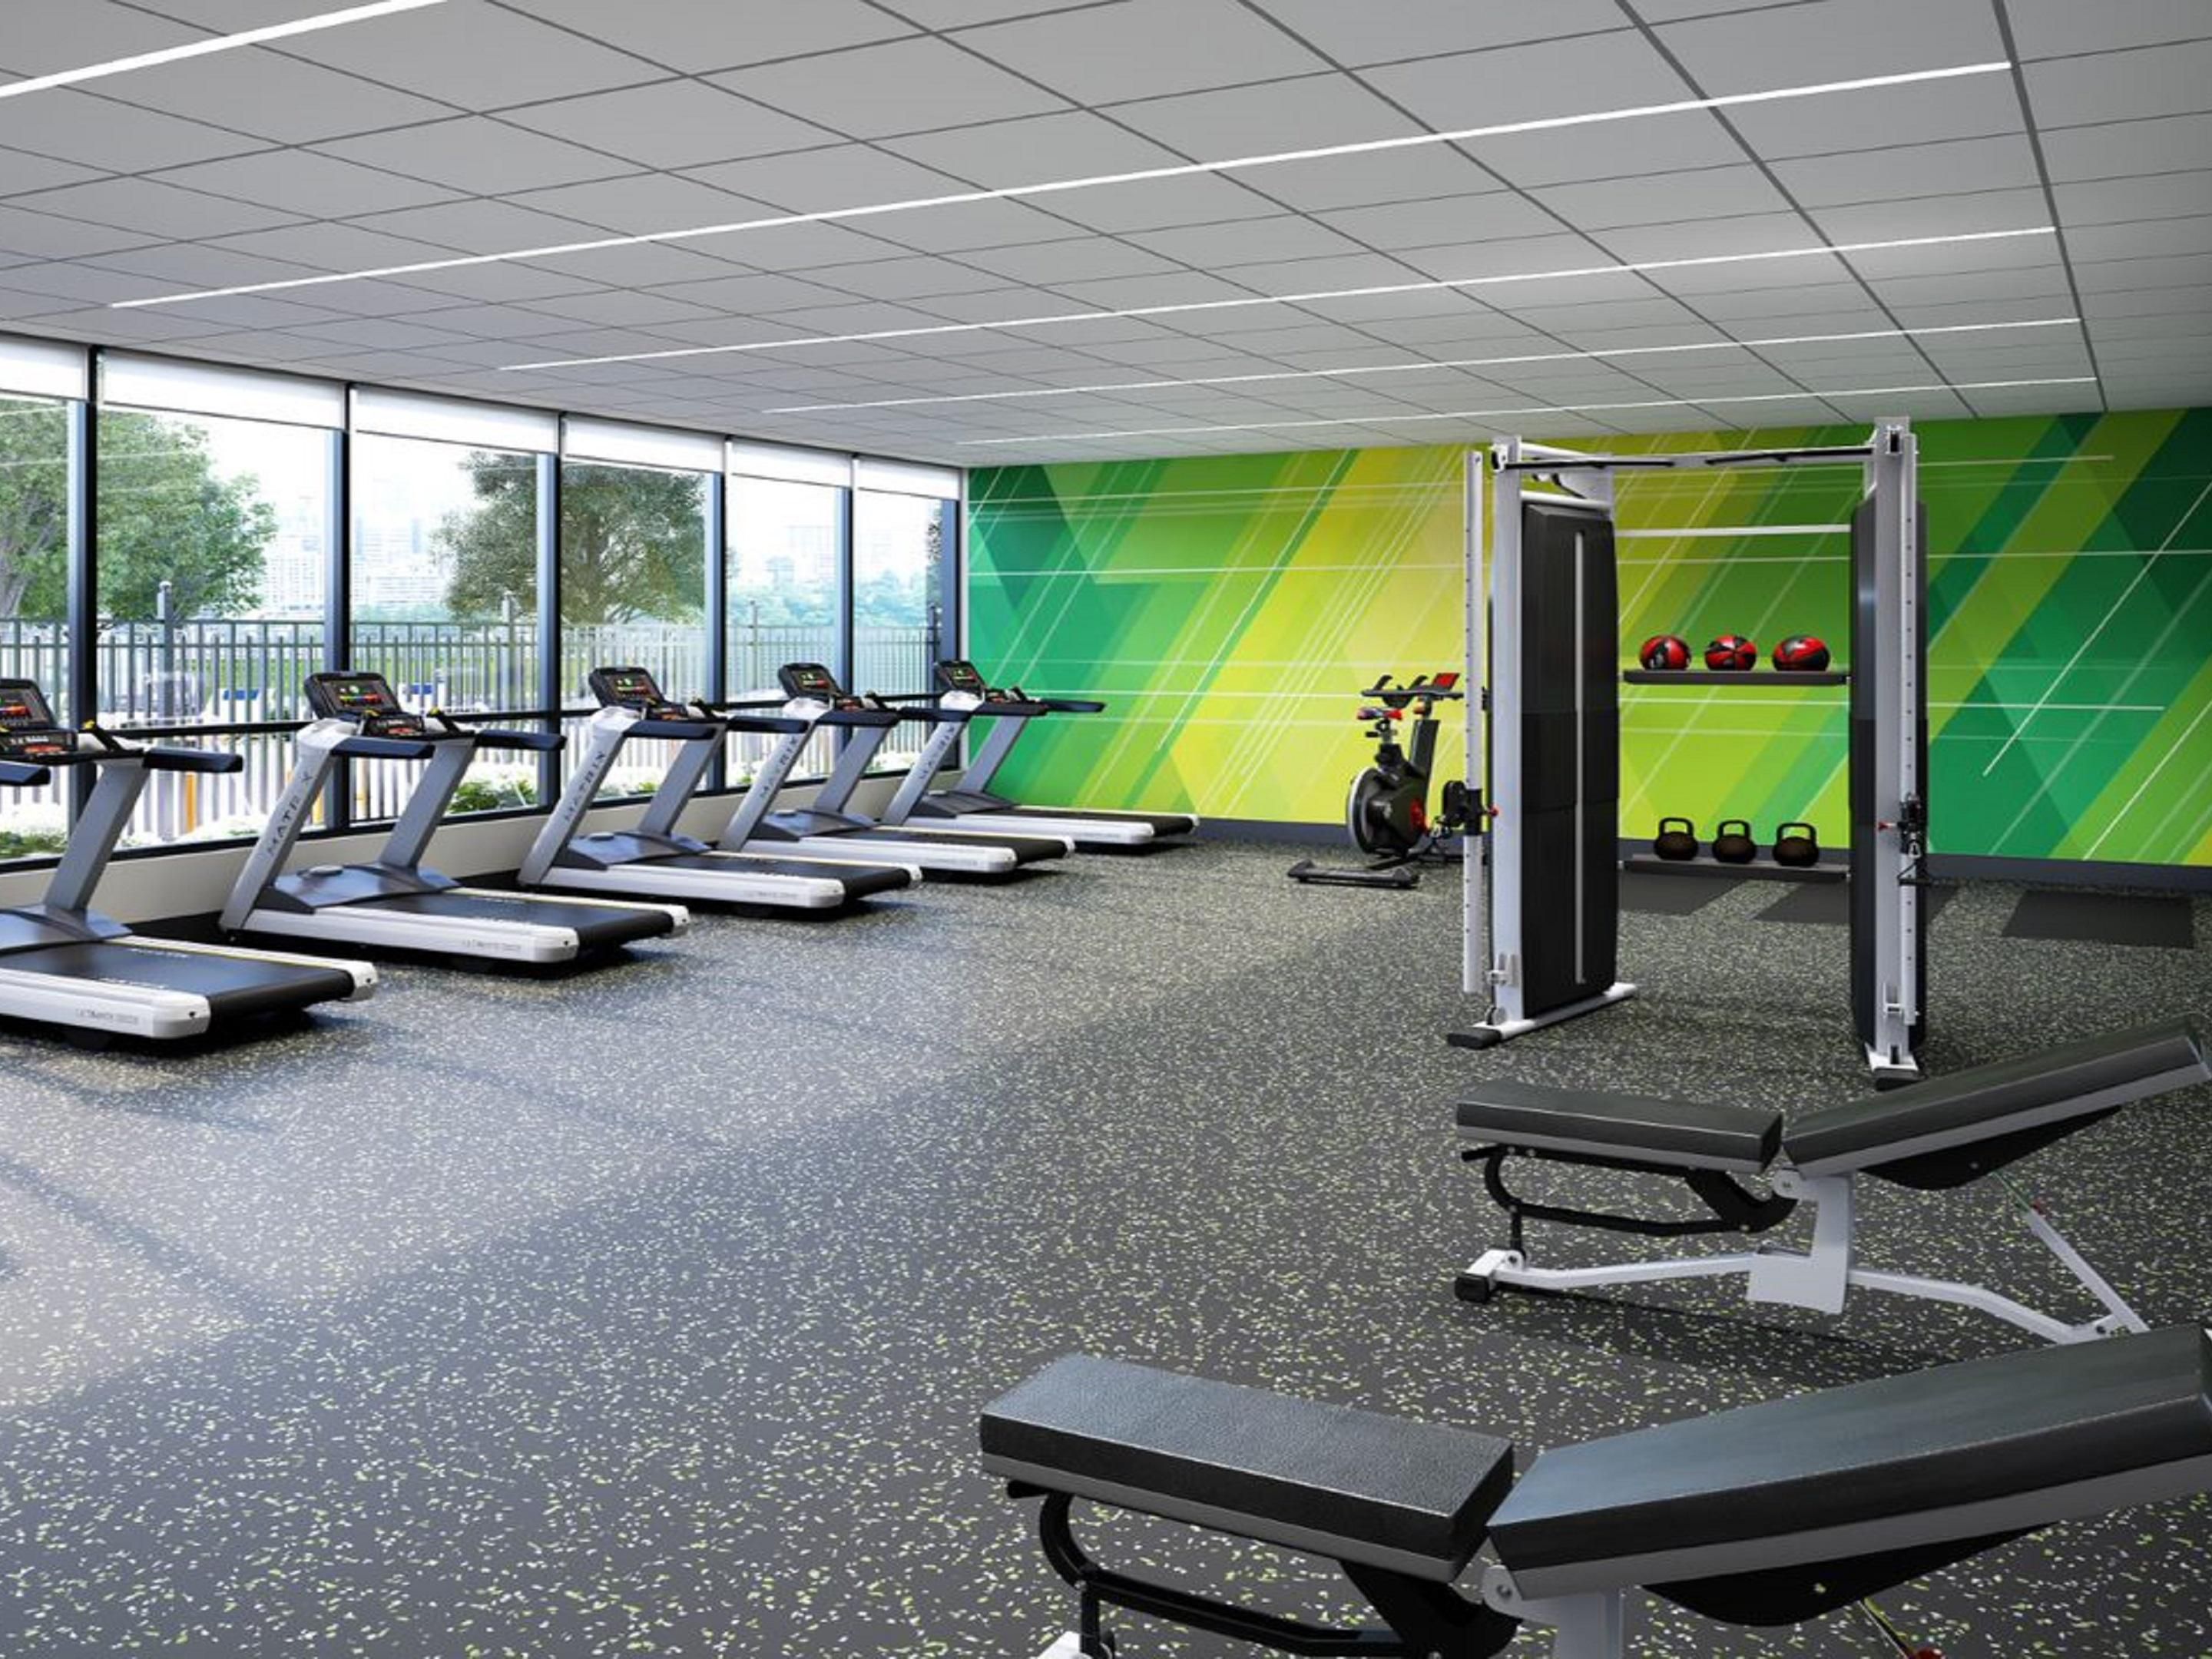 Get your sweat on in our complimentary, fully equipped fitness center.